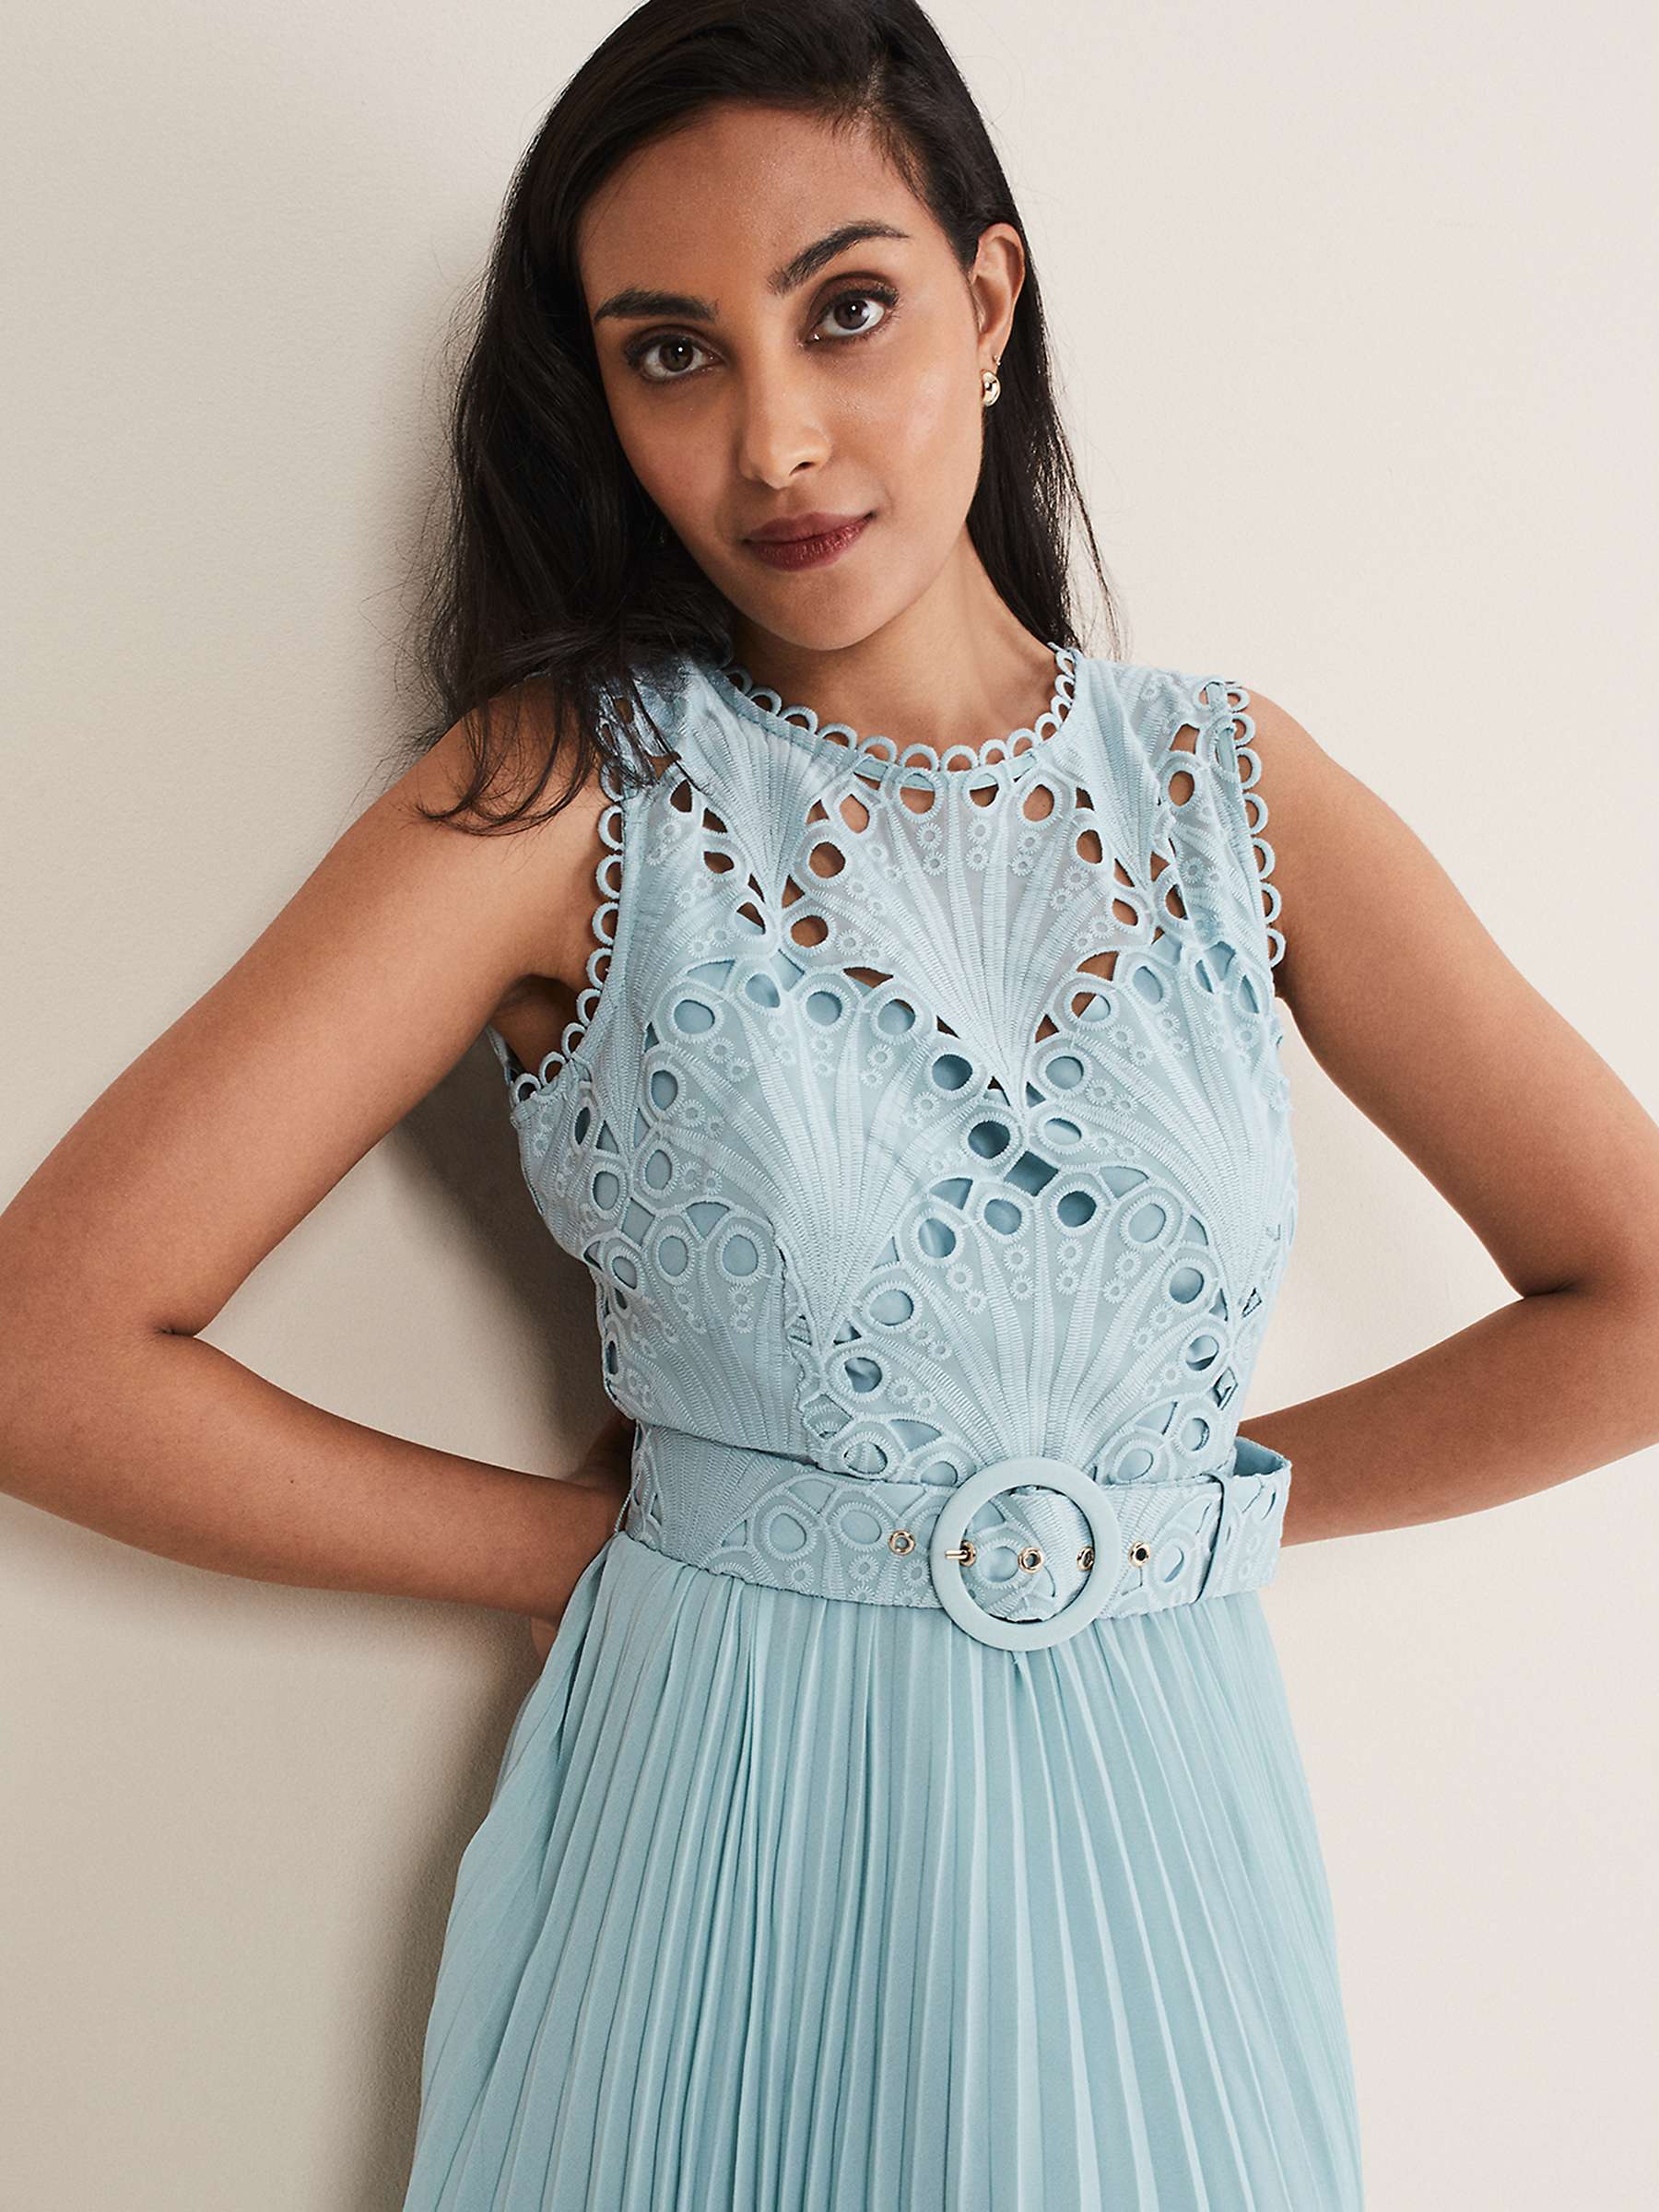 Buy Phase Eight Petite Amora Lace Bodice Dress, Peppermint Online at johnlewis.com